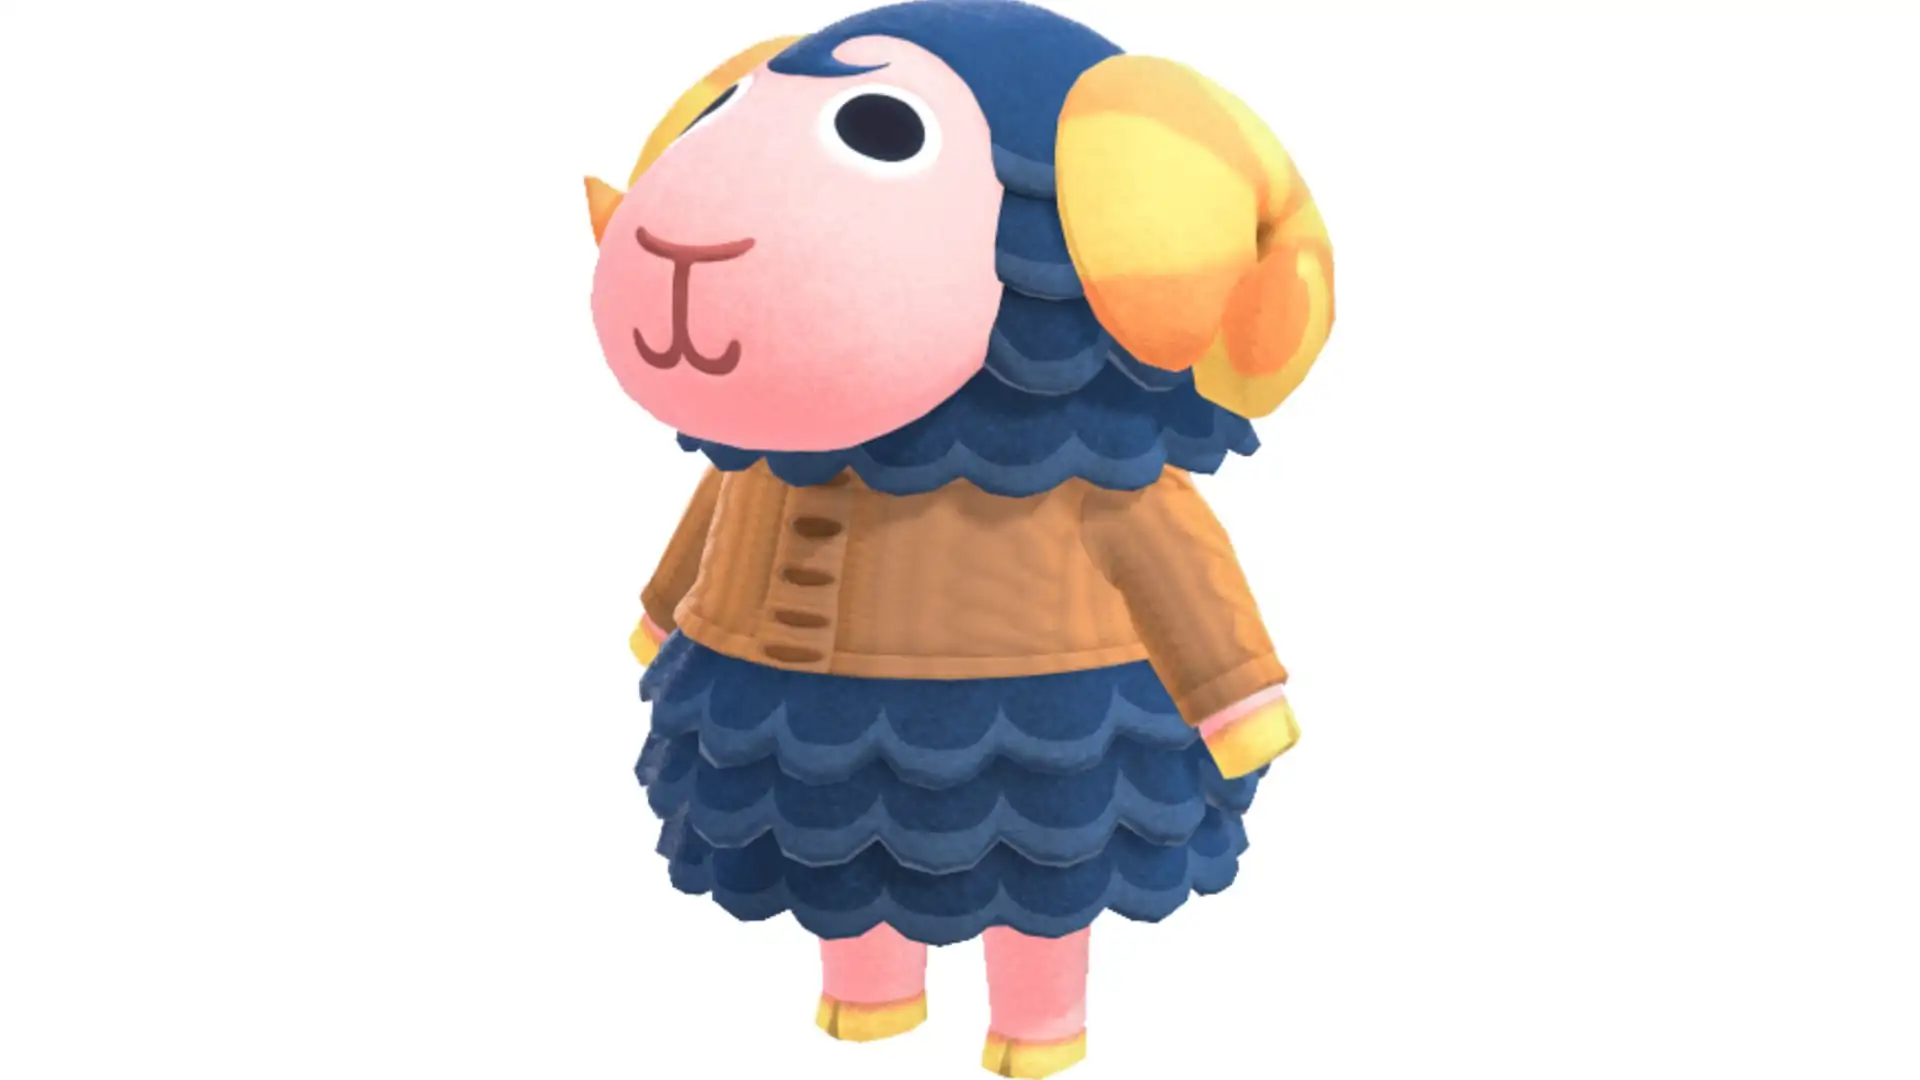 Download How Many of These Animal Crossing Villagers Can You Name?